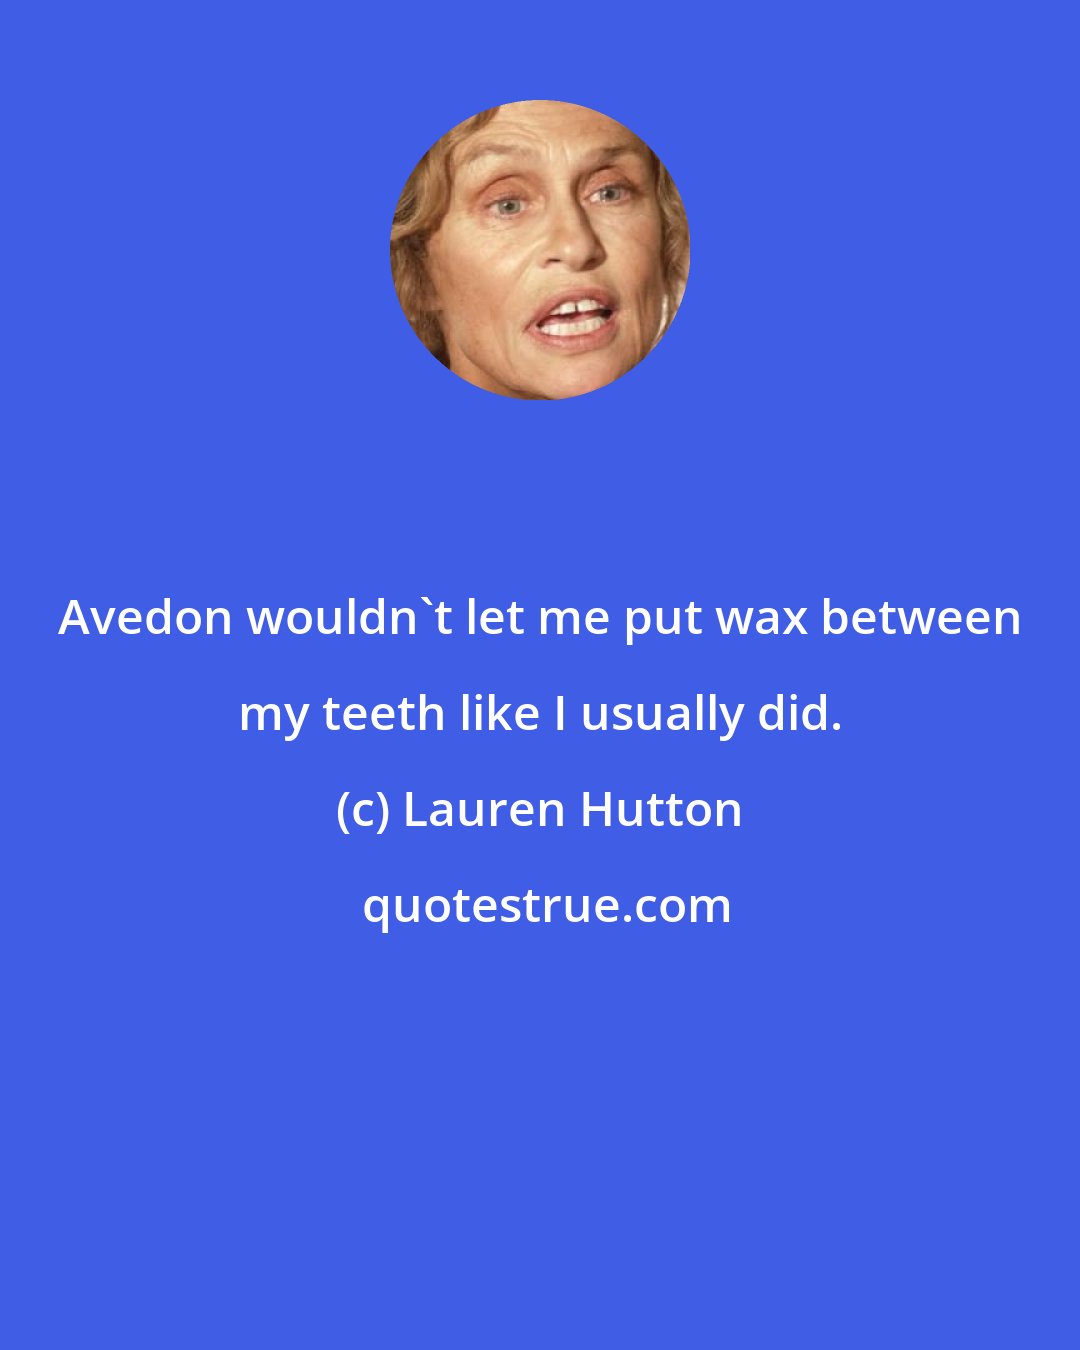 Lauren Hutton: Avedon wouldn't let me put wax between my teeth like I usually did.